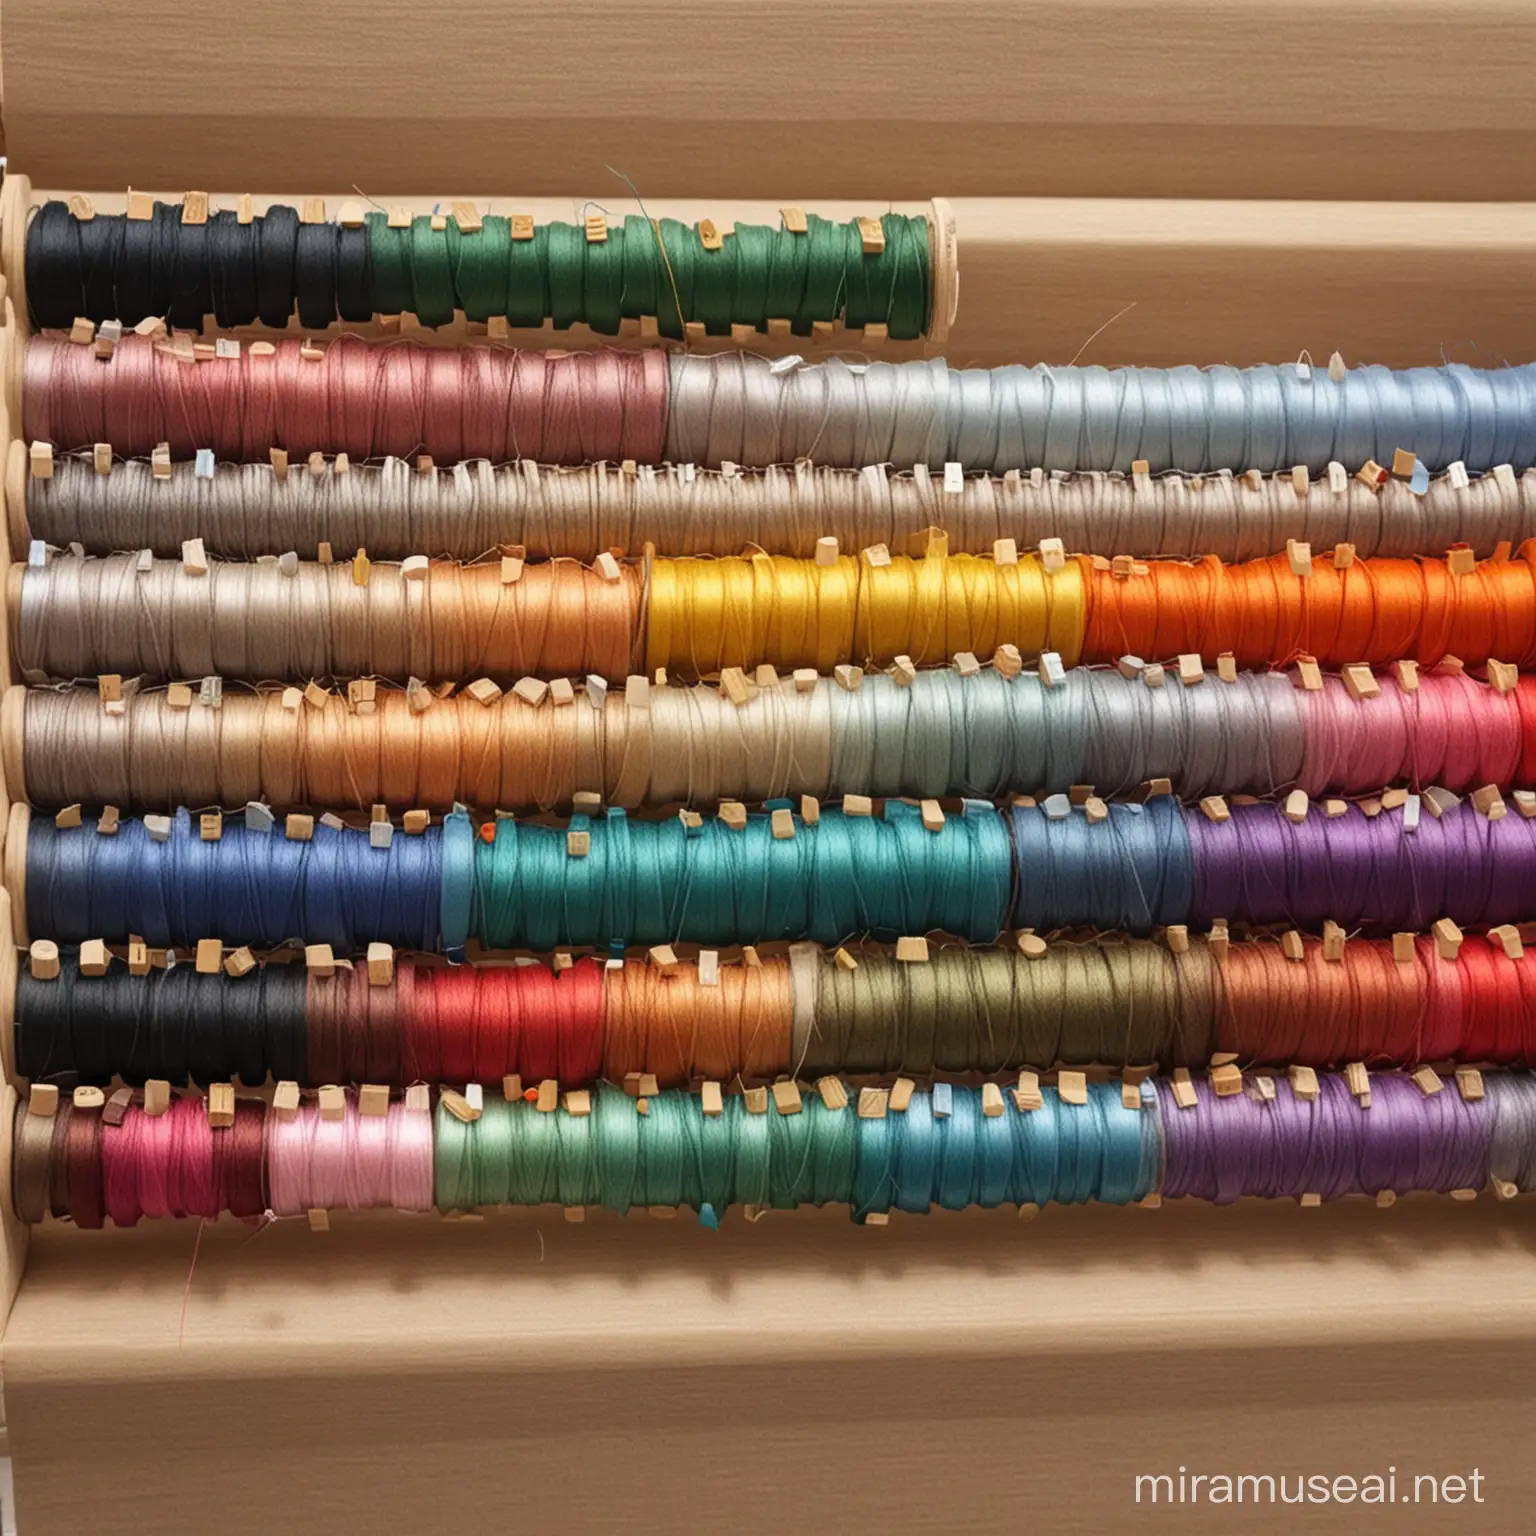 Neatly Organized Spools of Colorful Thread